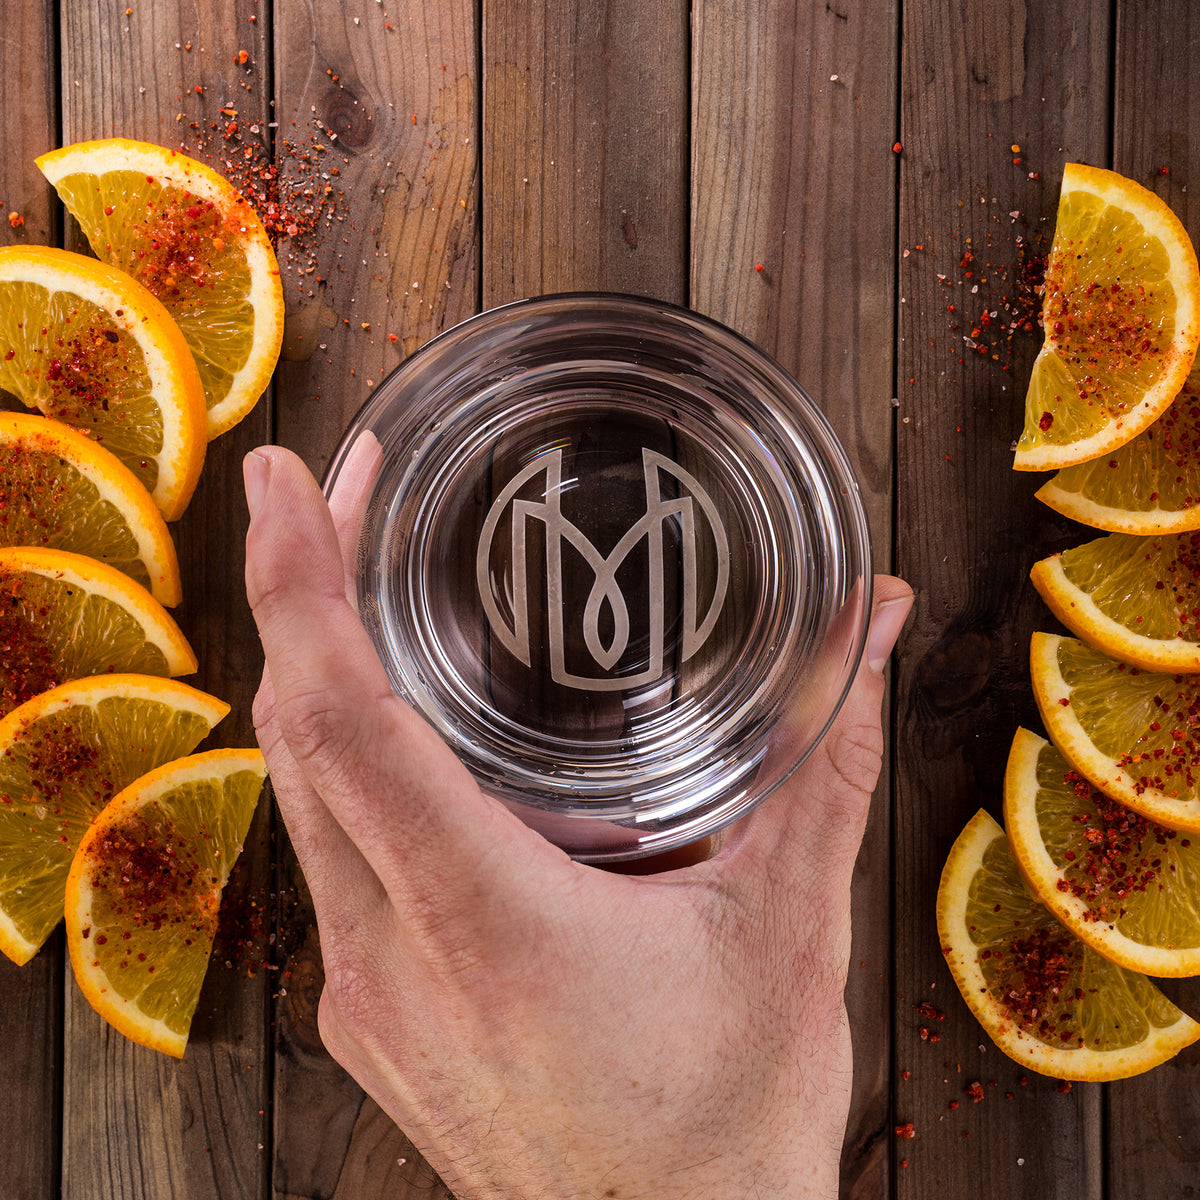 An overhead shot of the Oaxaca glass showing the Historically Modern monogram. It's on being placed down onto a wood table, surrounded by arcs of orange slices on either side, with sprinked red salt.